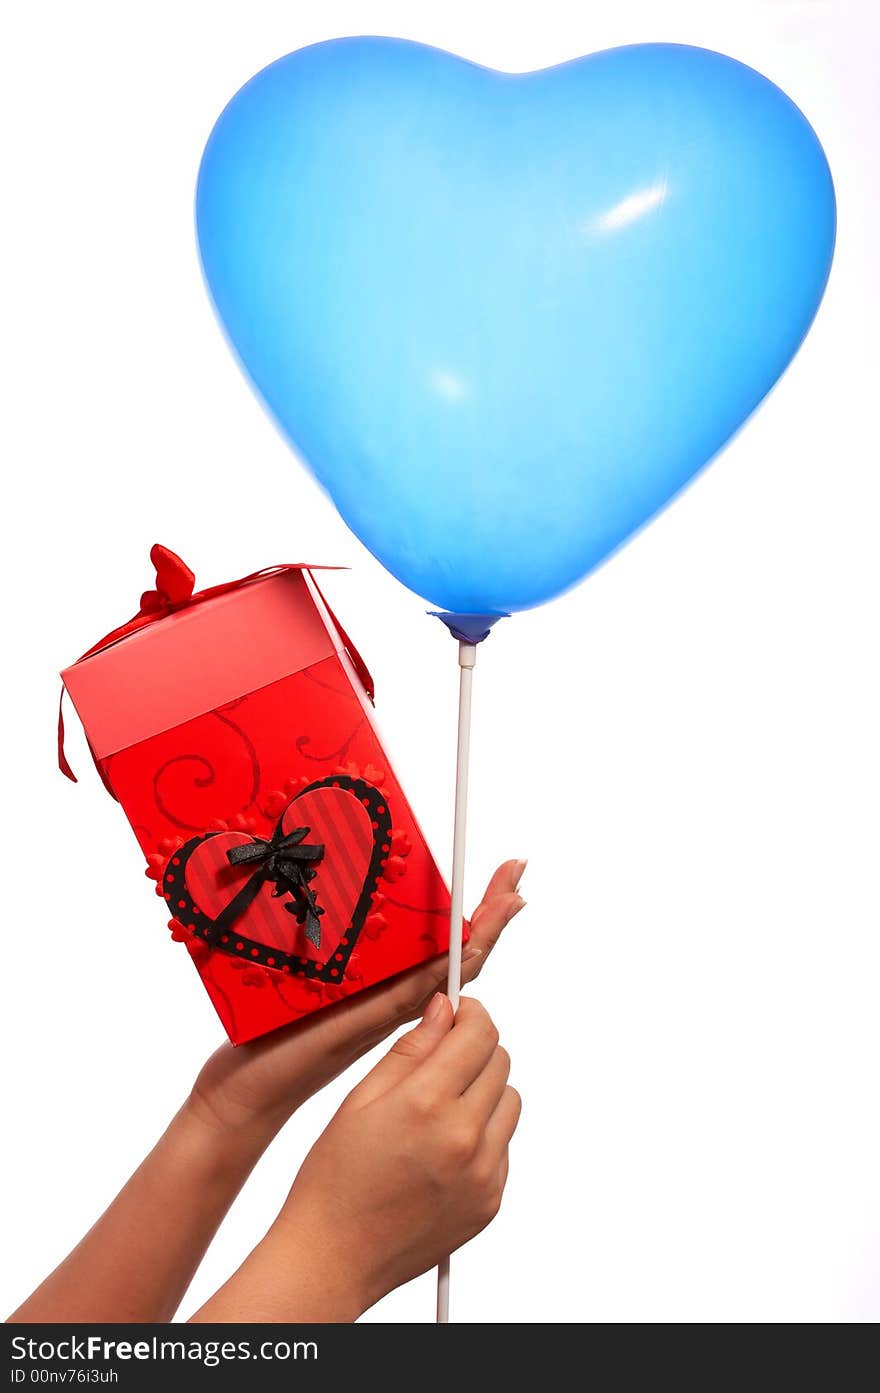 Hands holding a heartshape balloon and a red gift box